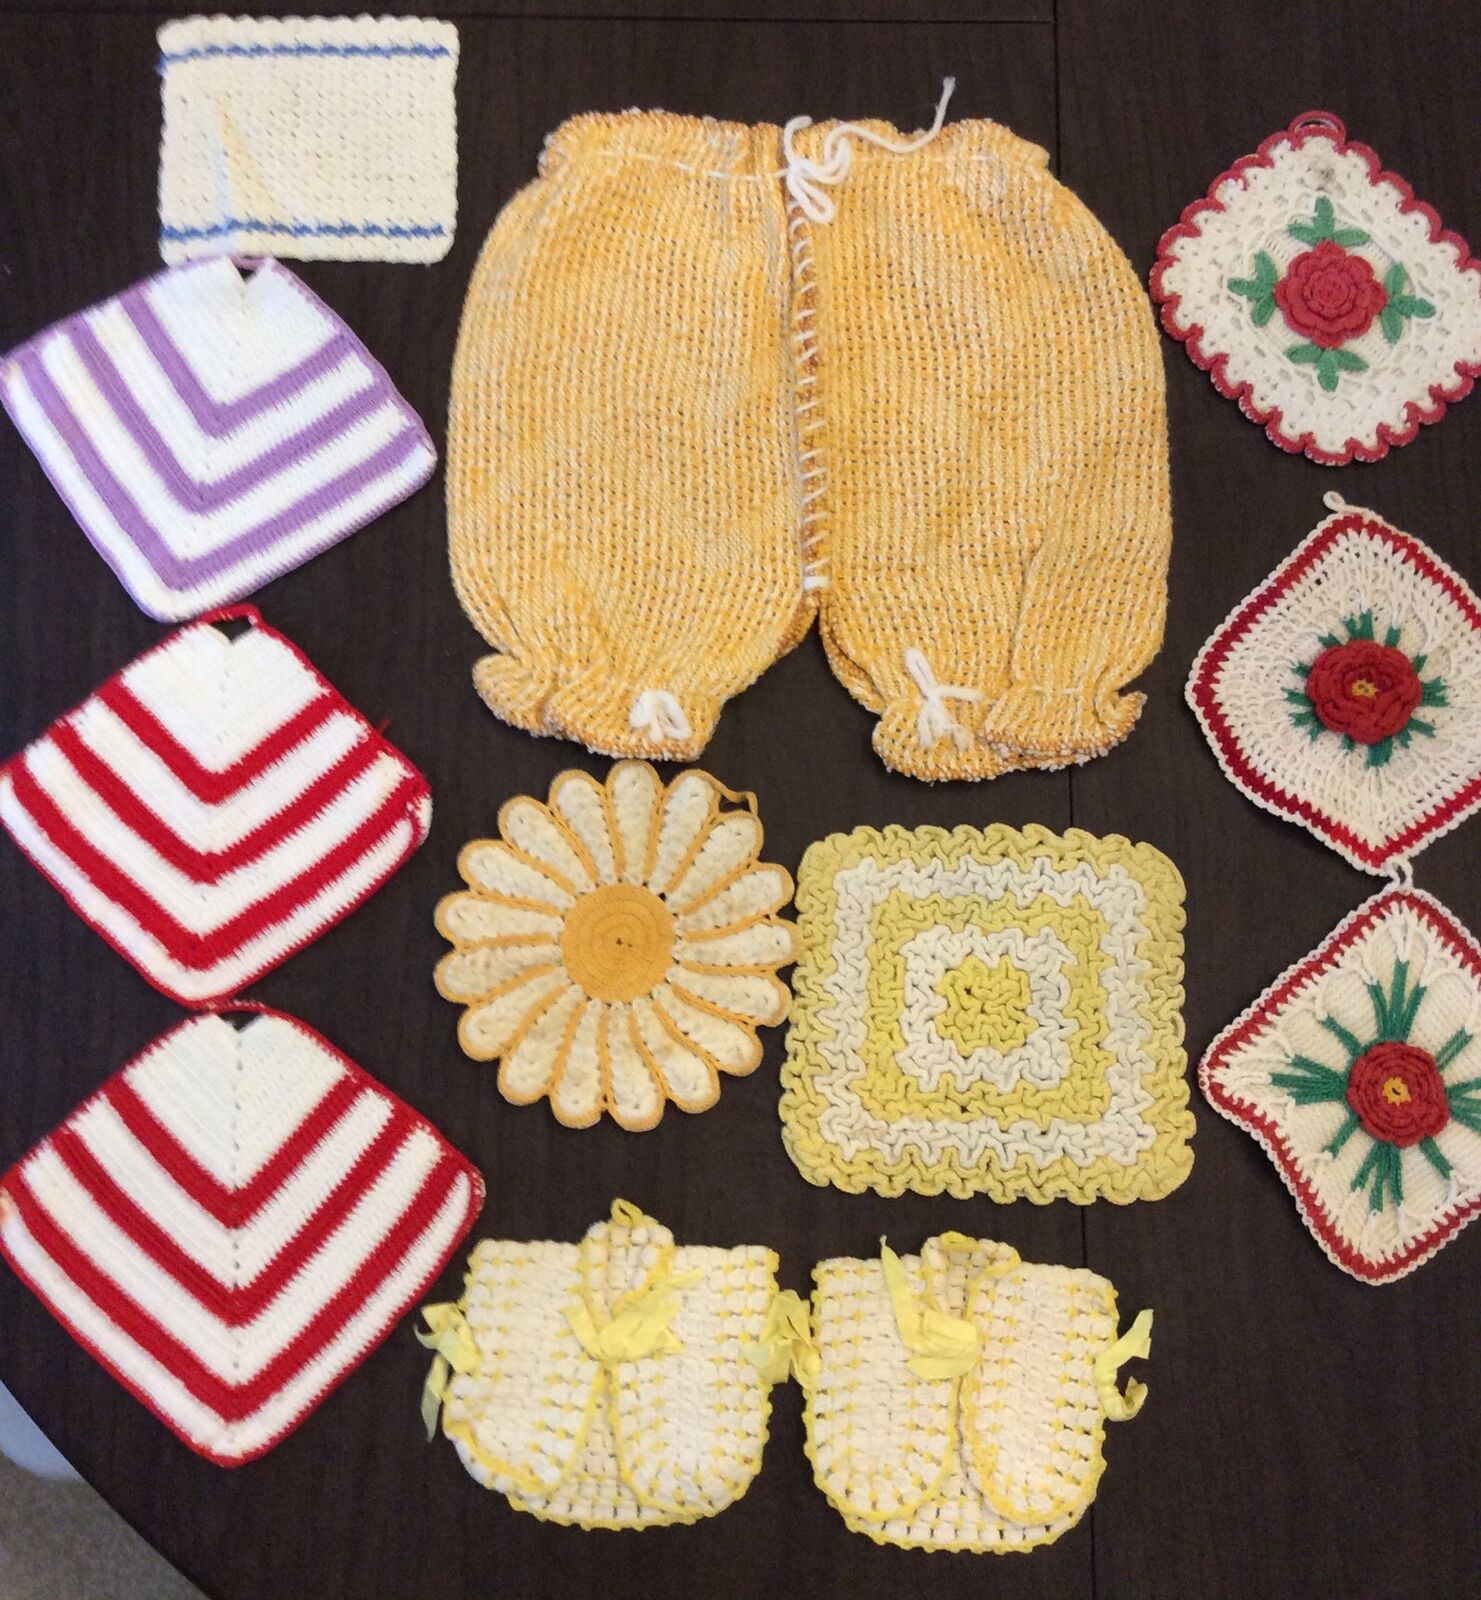 Lot 12 Vintage Hand Crocheted Pot Holders Hot Pads Yellow White Red Irish Roses